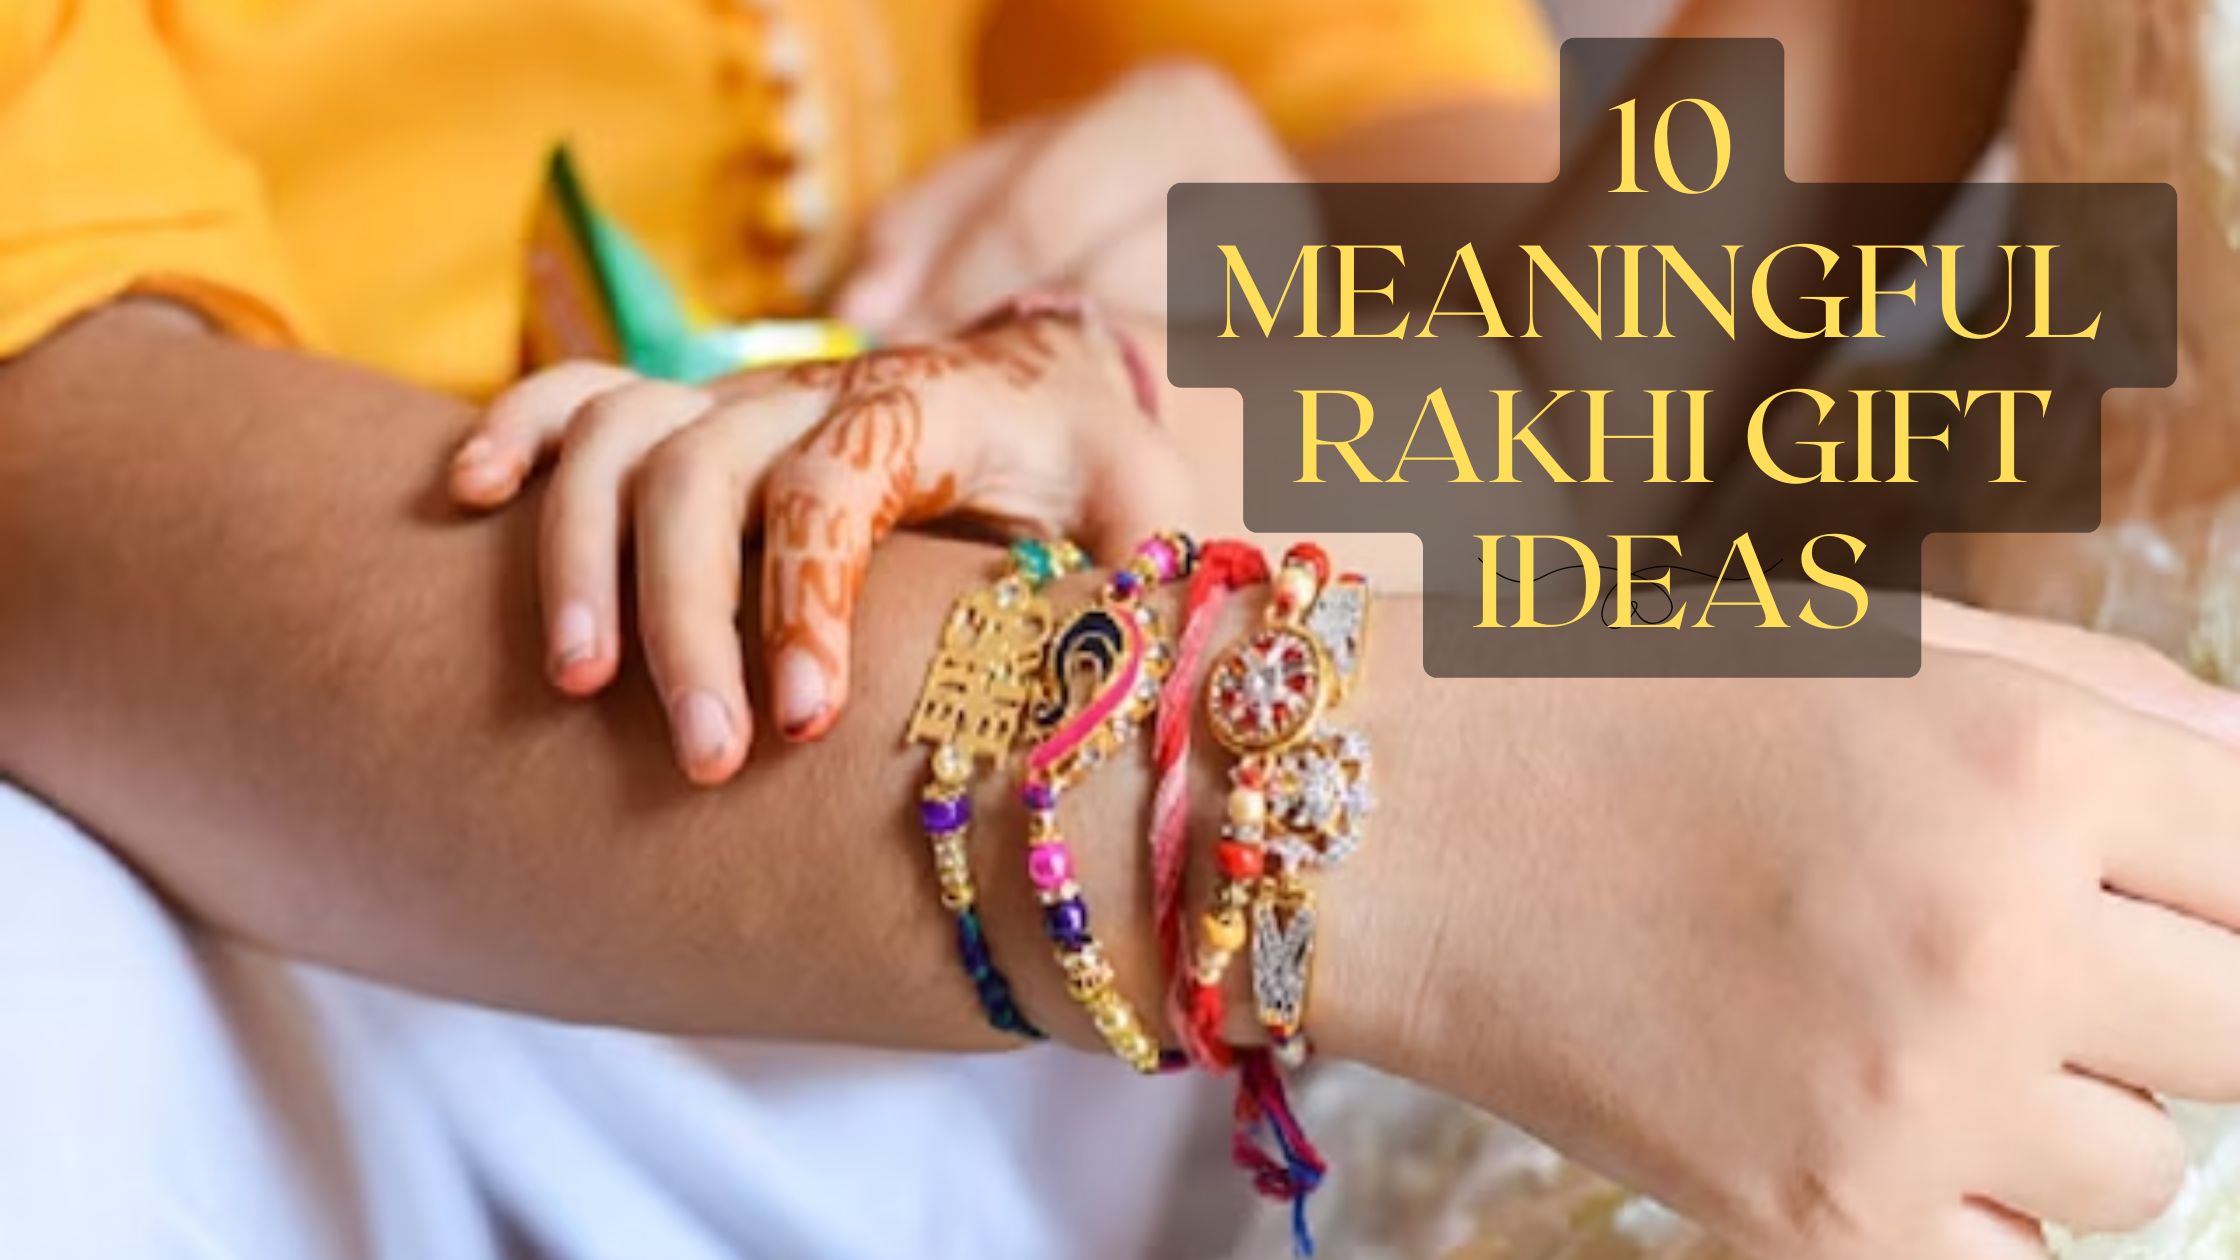 Make Your Brother Best Friend Forever With These 10 Meaningful Rakhi Gift Ideas